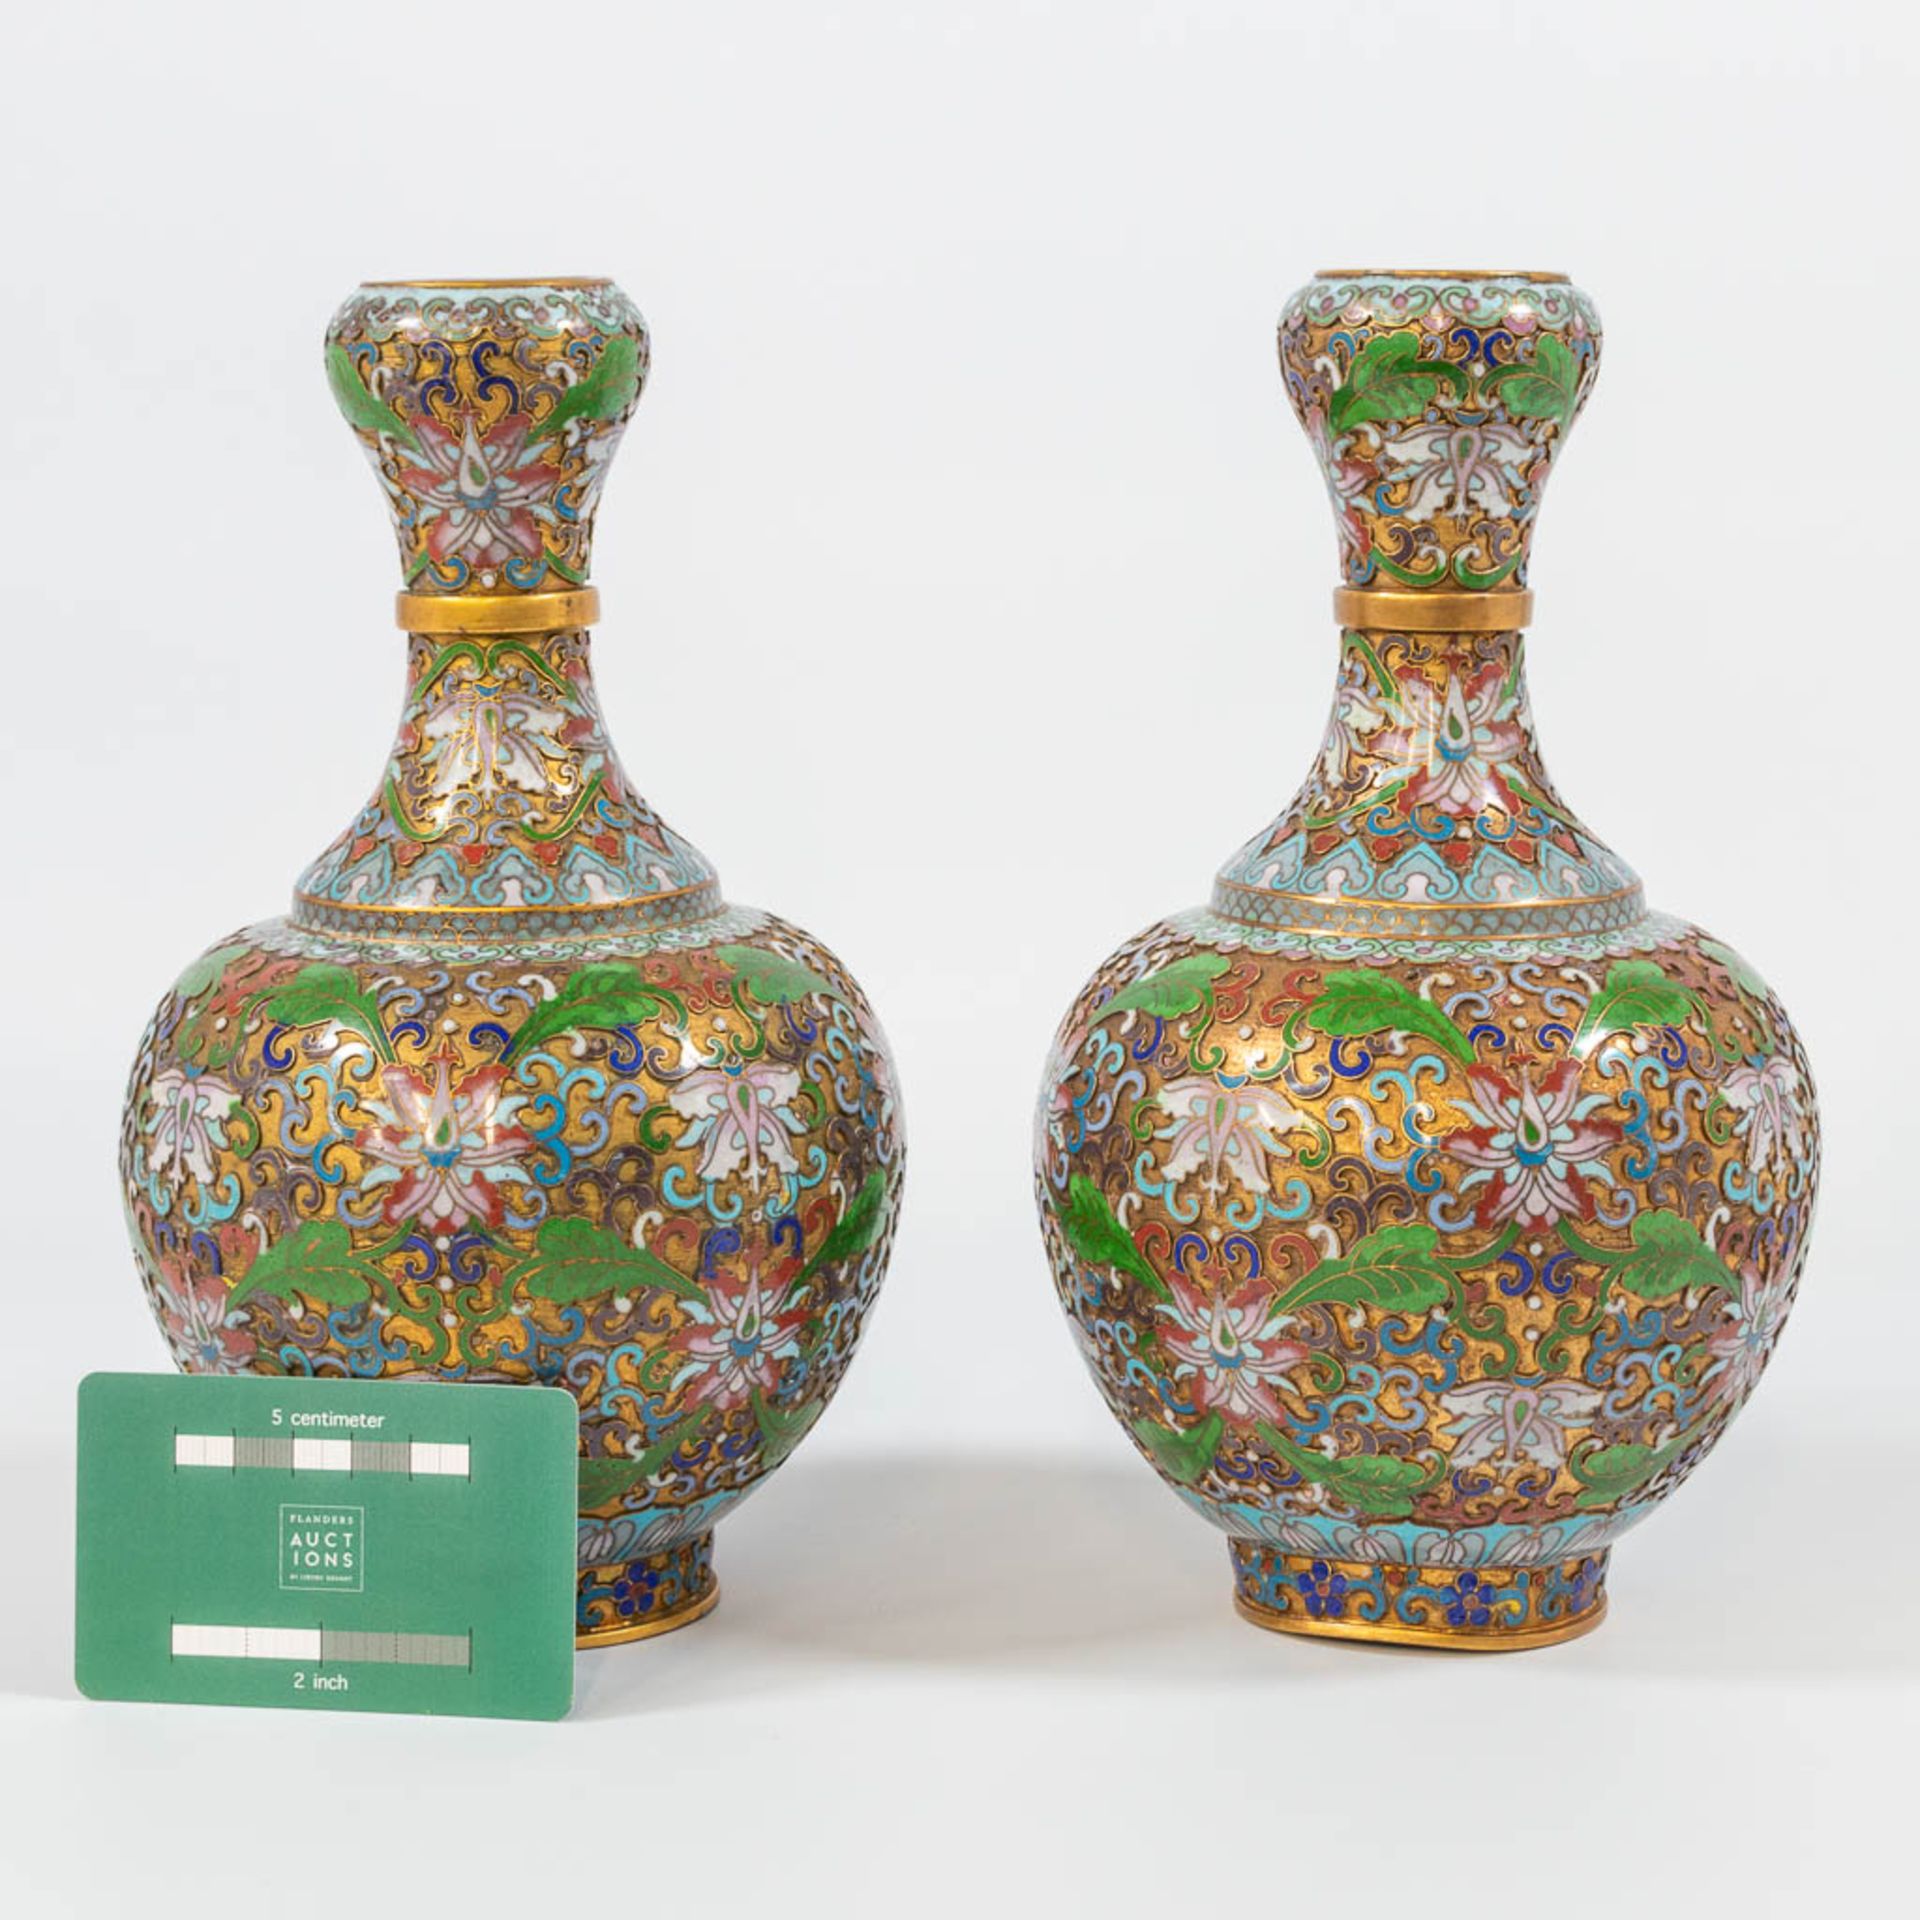 A pair of openworked Cloisonné vases, made of Bronze and enamel. - Image 3 of 17